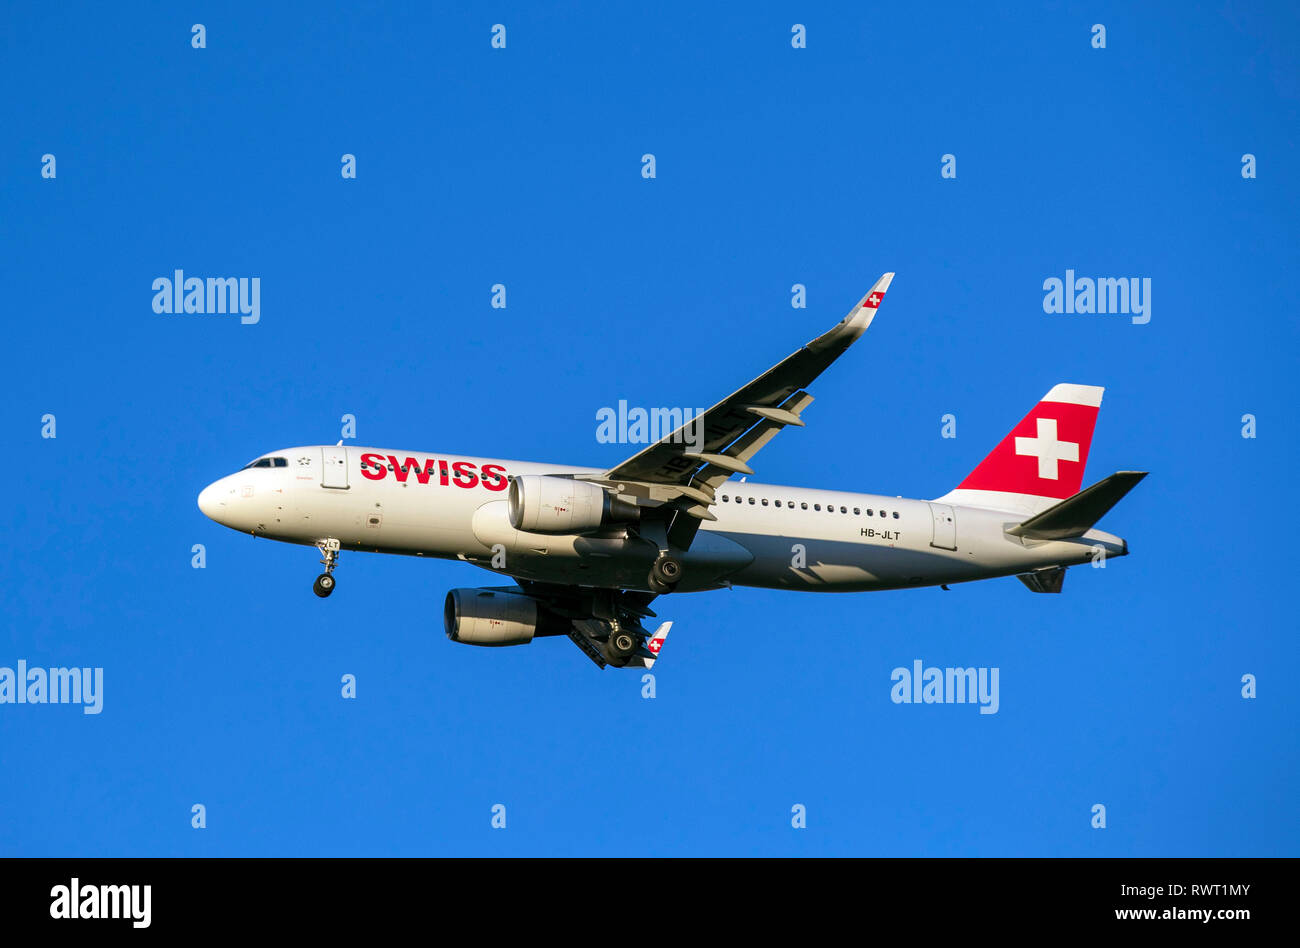 A Swiss International Airlines Airbus A320 plane lands at Heathrow Airport in West London. Stock Photo